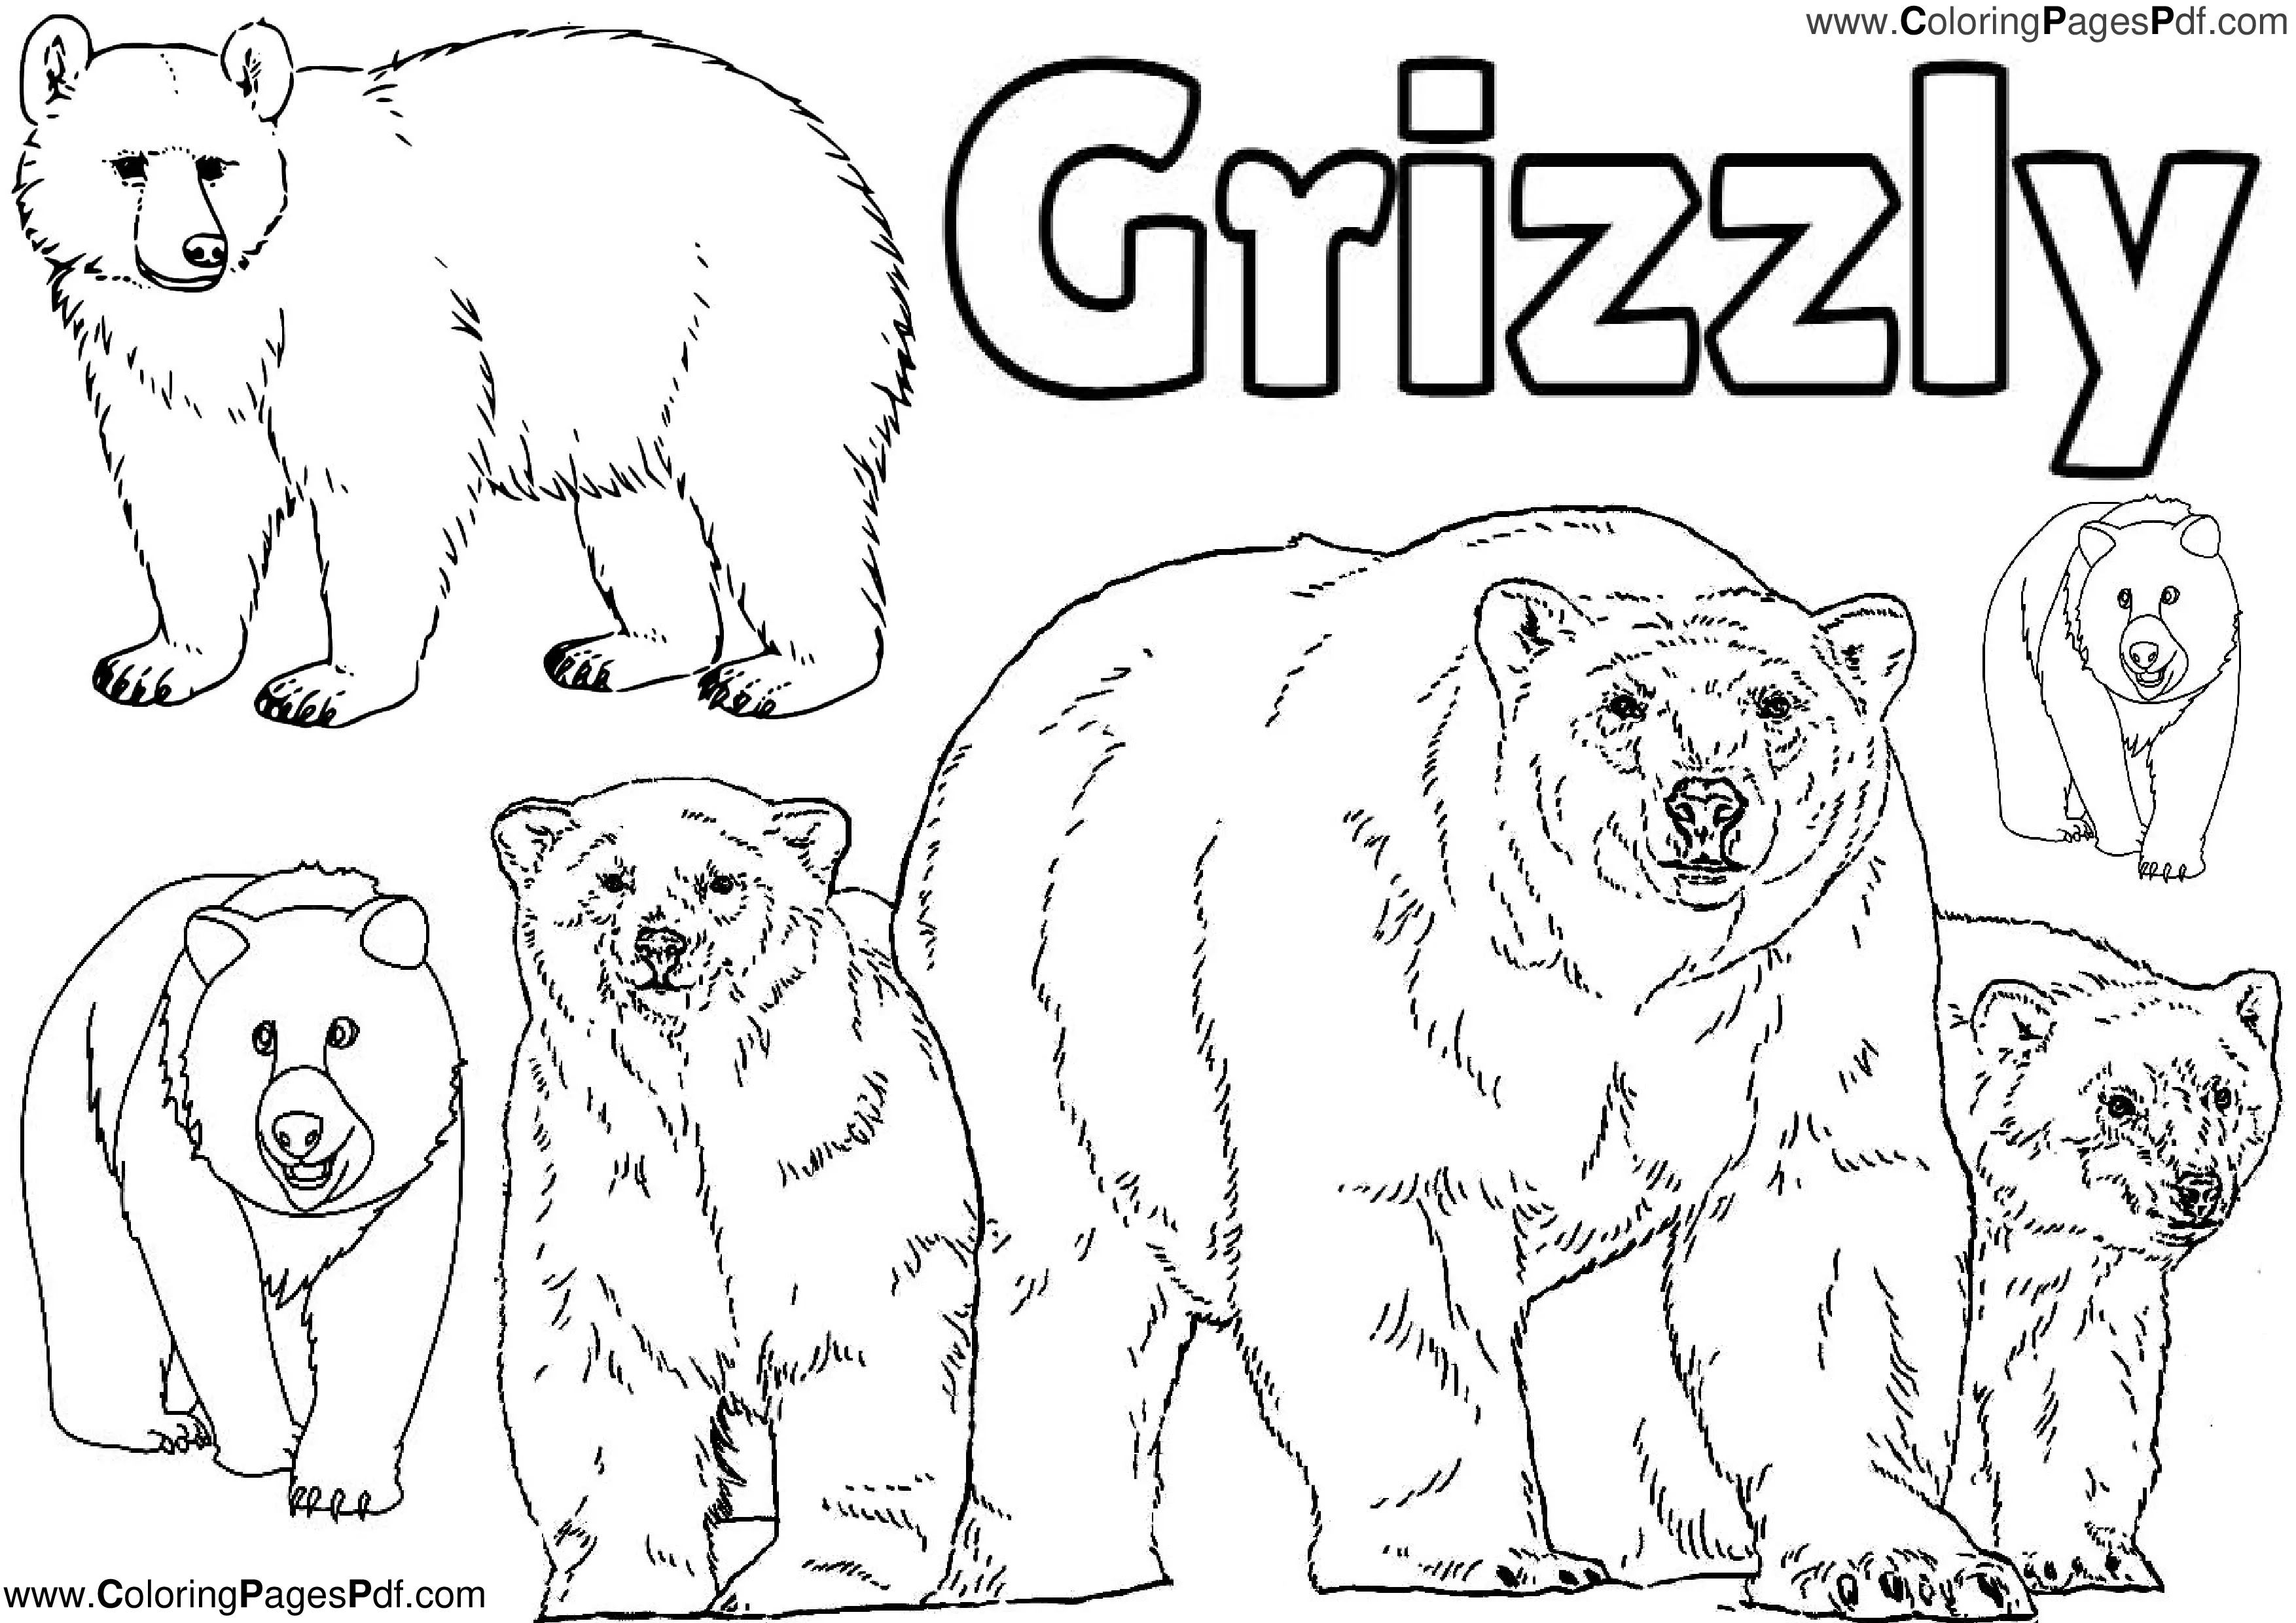 Grizzly Bear coloring pages